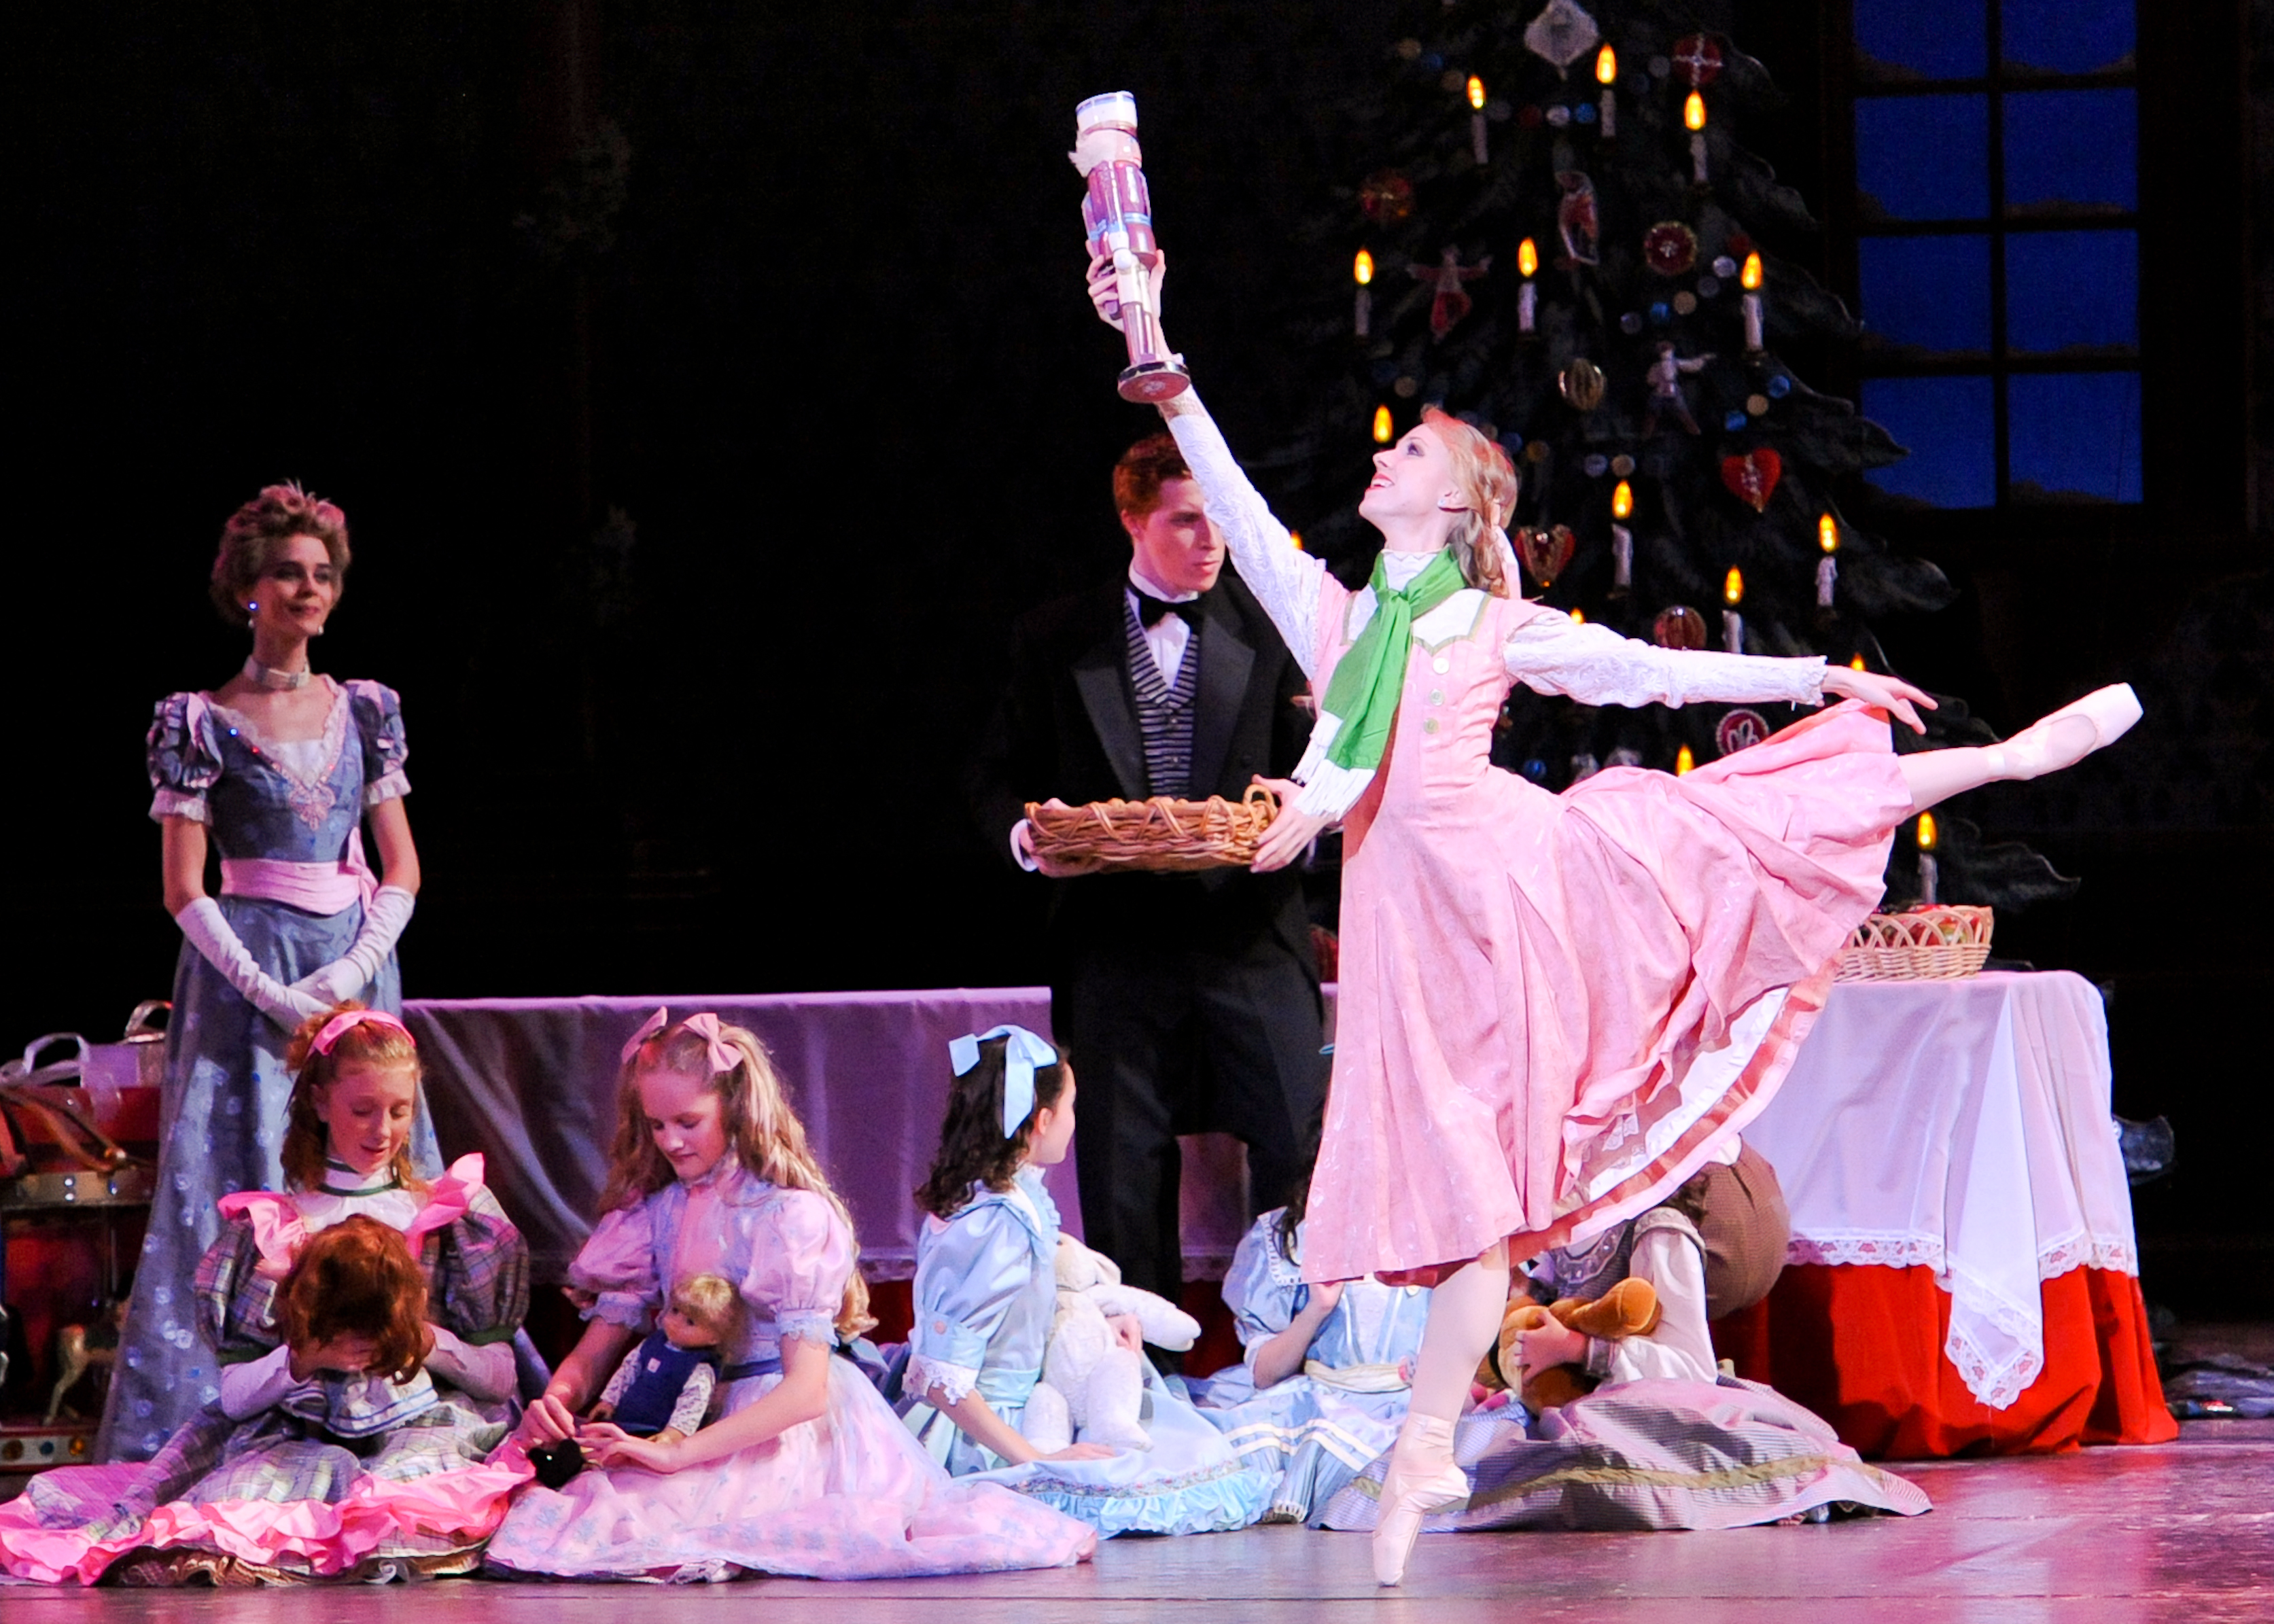 It's Christmas in Pittsburgh circa the 1890s in PBT's unique production of 'The Nutcracker.'